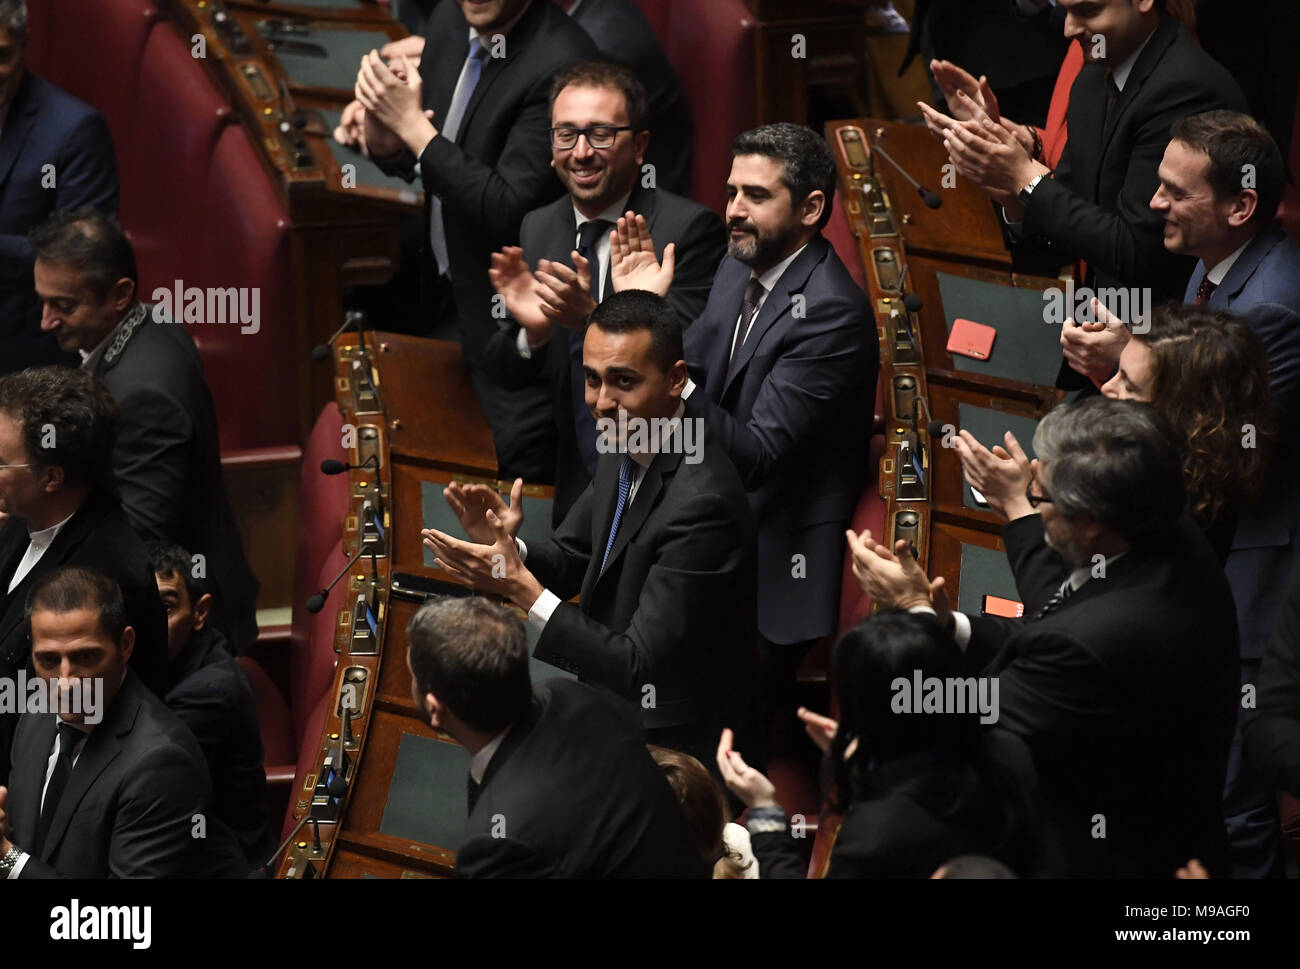 Rome. 24th Mar, 2018. Five Stars Movement members celebrate party member Roberto Fico being elected lower house speaker at the lower house of parliament in Rome, Italy, on March 24, 2018. Italy's center-right bloc and the anti-establishment Five Star Movement joined forces Saturday to elect a speaker for each chamber of parliament, in what could be a test run for a possible government alliance in the wake of an inconclusive March 4 general election. Credit: Xinhua/Alamy Live News Stock Photo